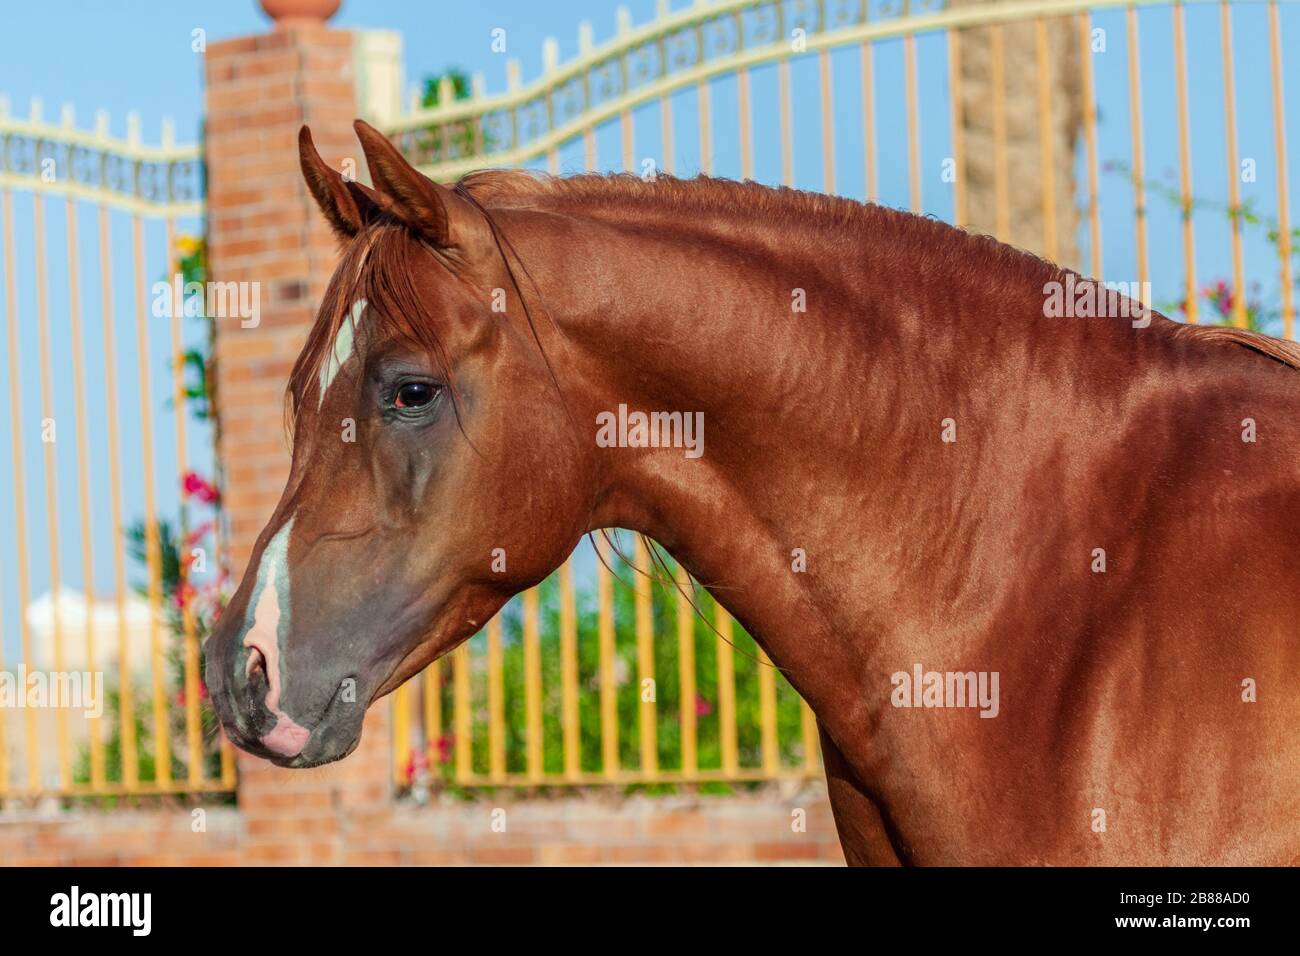 Chestnut arabian horse portrait in motion agains paddock with bars.Animal portrait, close. Stock Photo